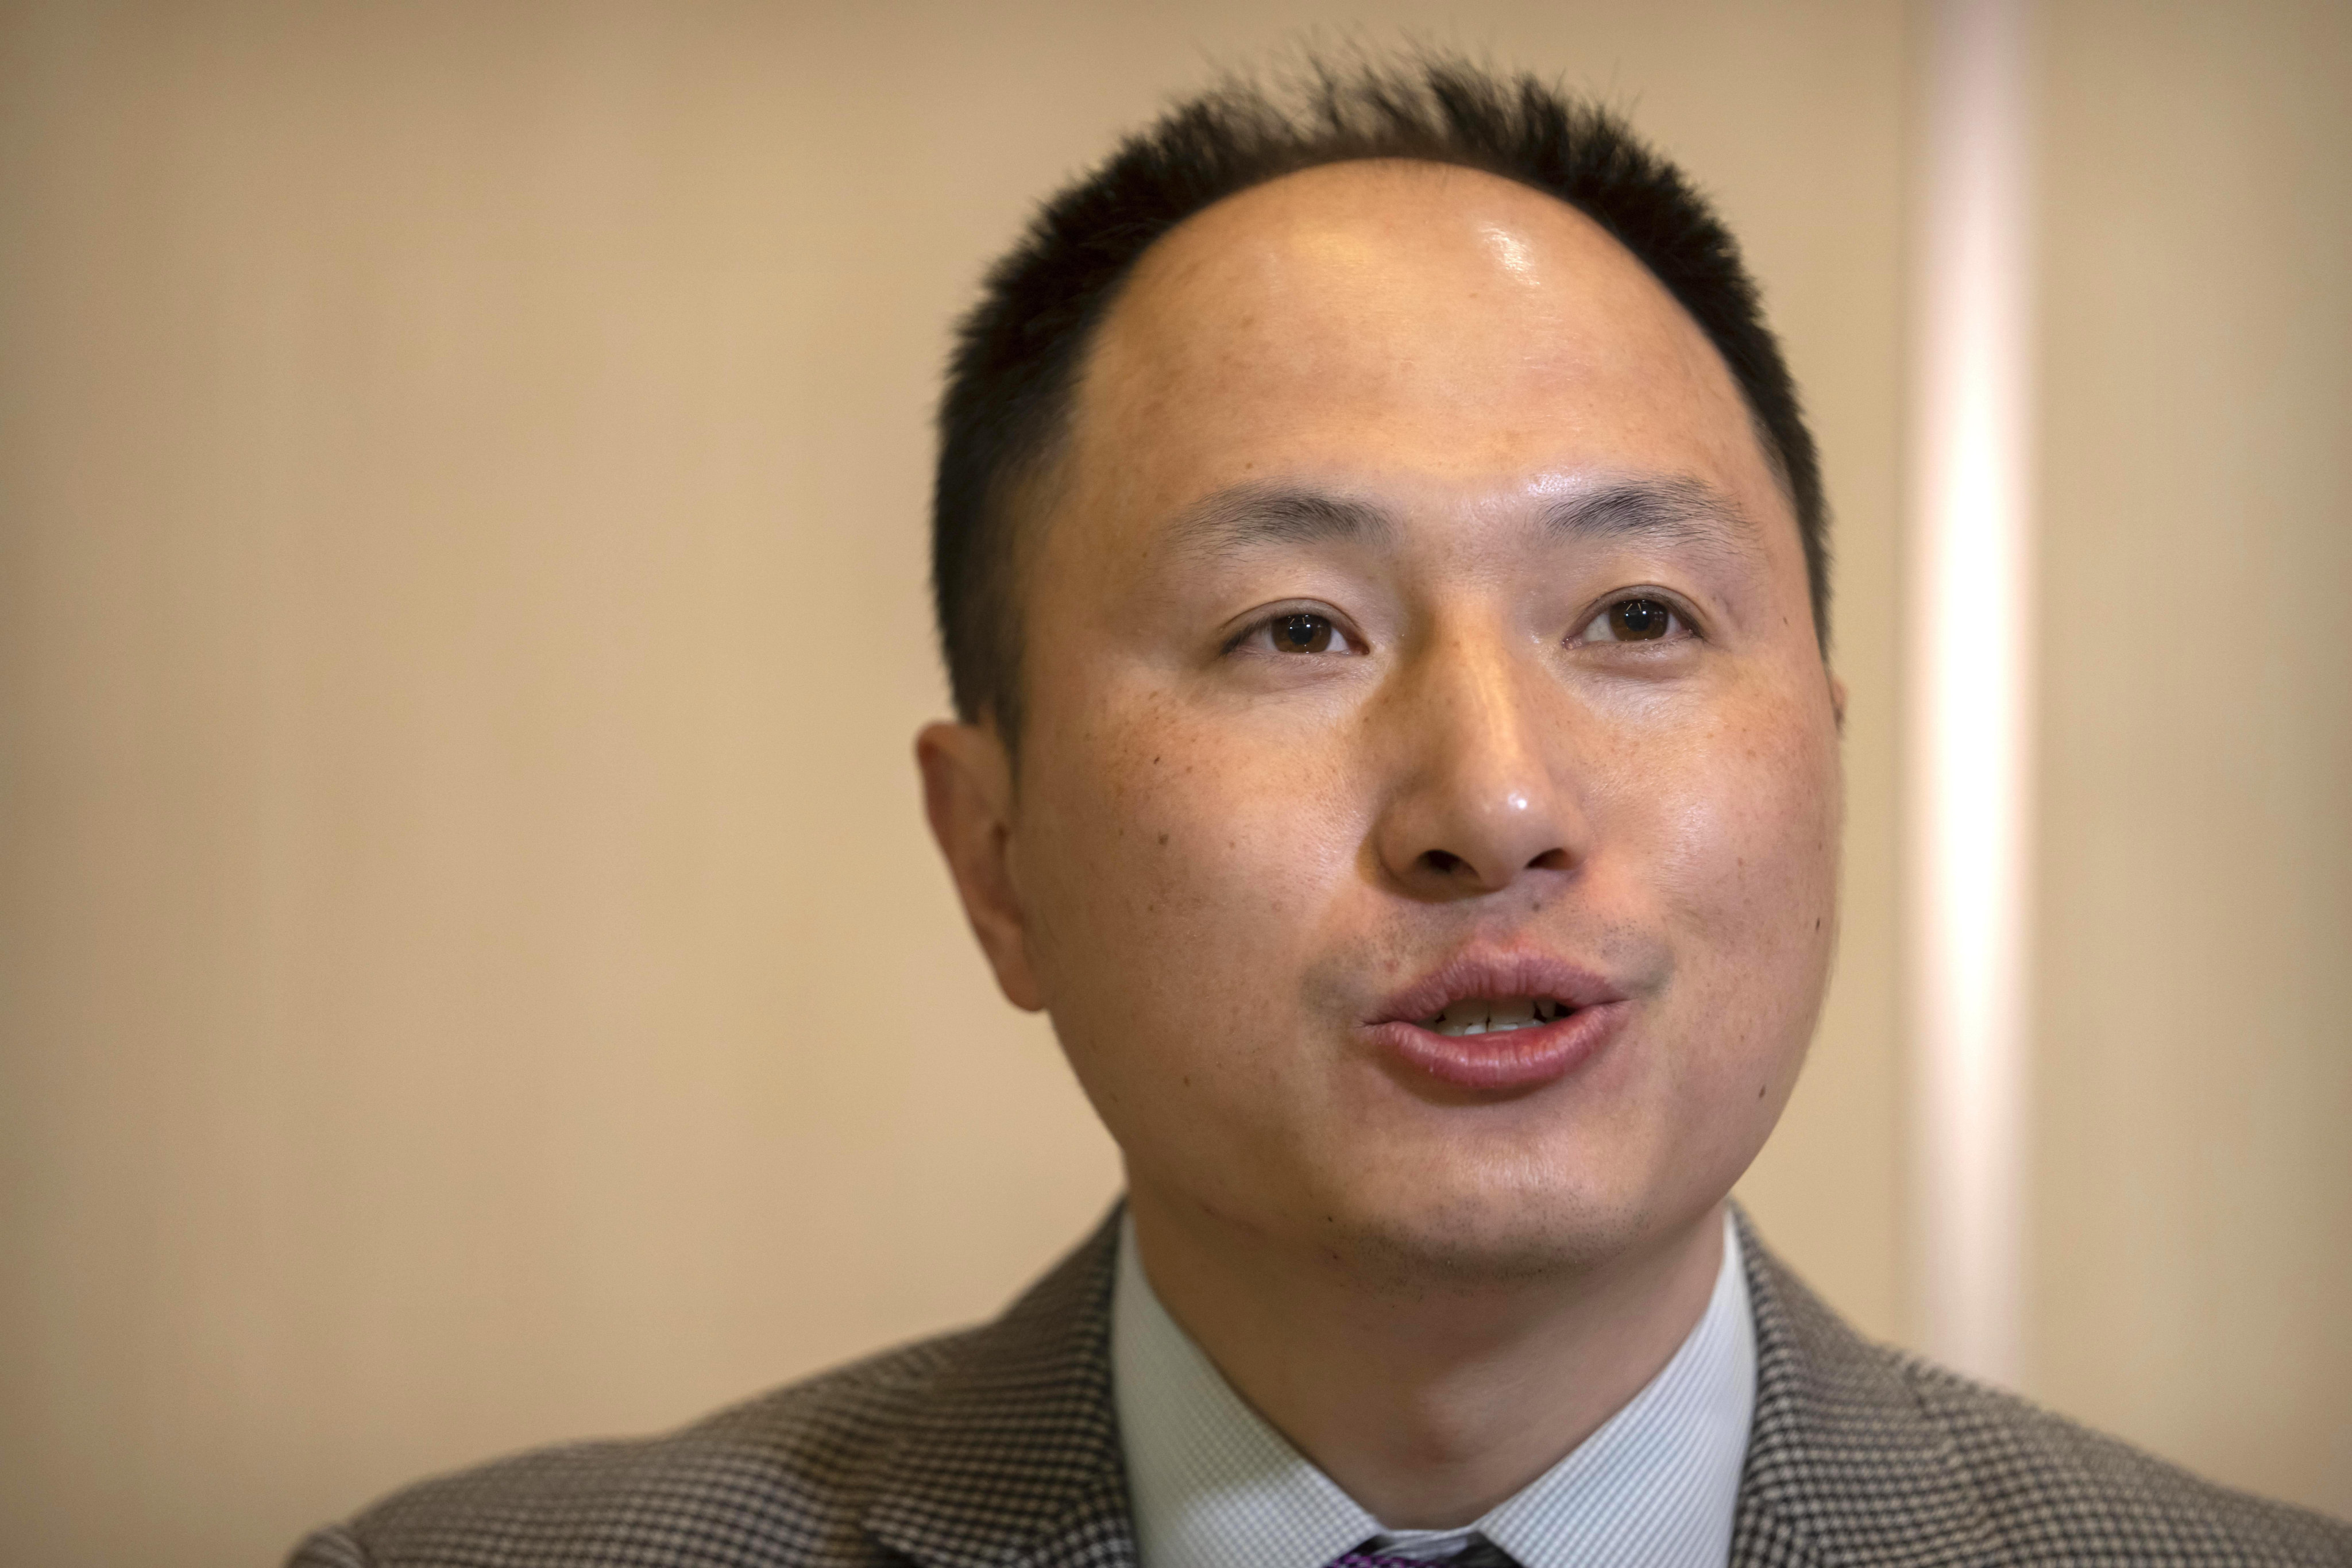 Scientists, ethicists and law experts in China have accused He Jiankui of refusing to reflect on serious violations of gene-editing ethics, laws and regulations. Photo: AP